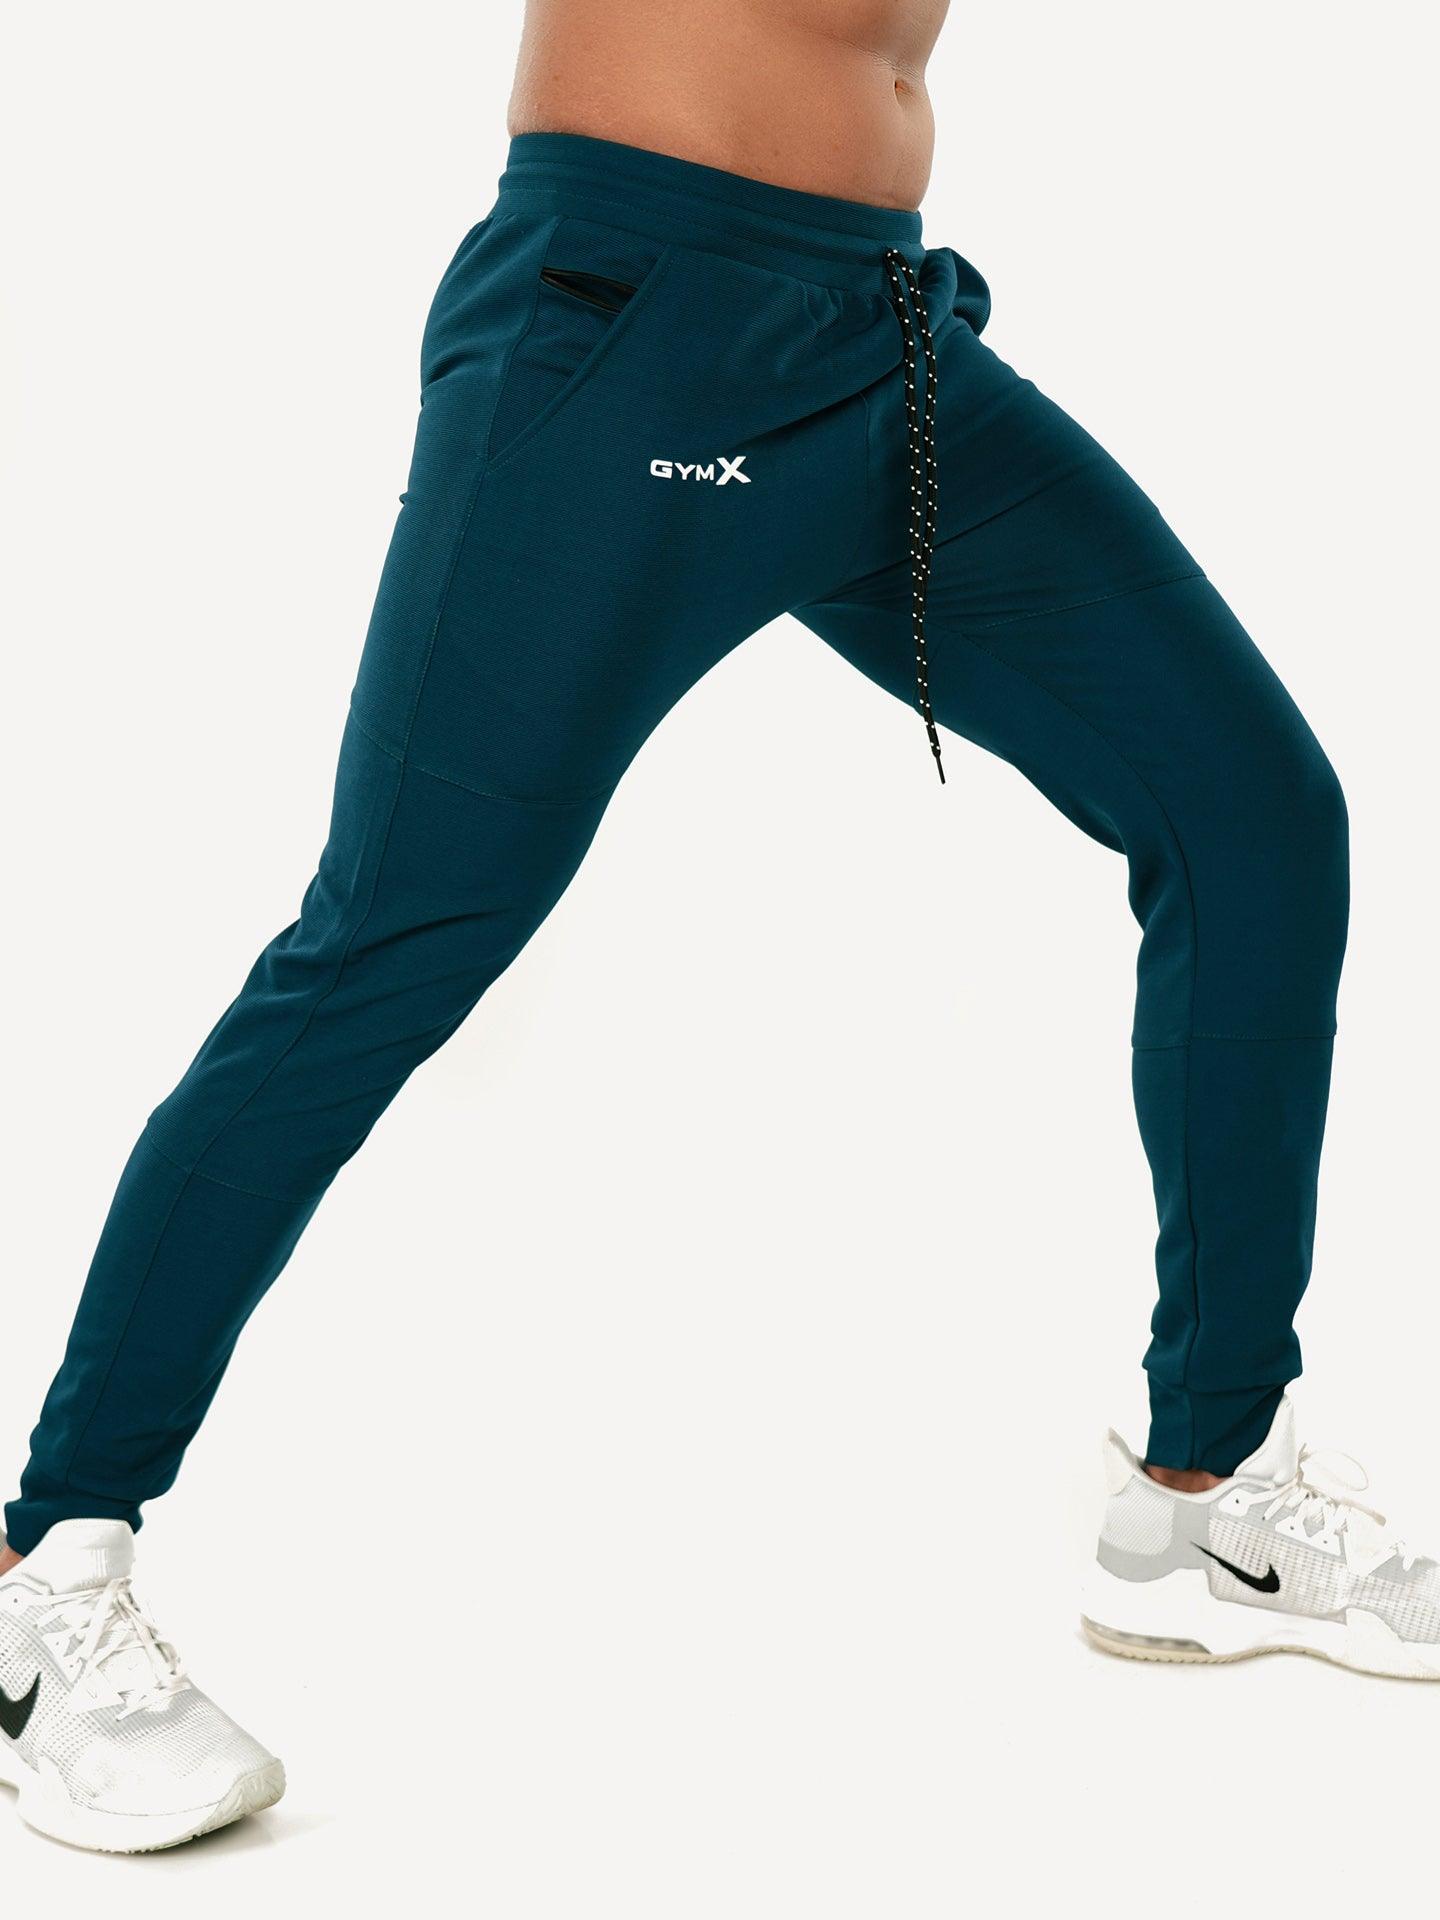 Cord GymX Bottoms: Airforce Blue- Sale - GymX